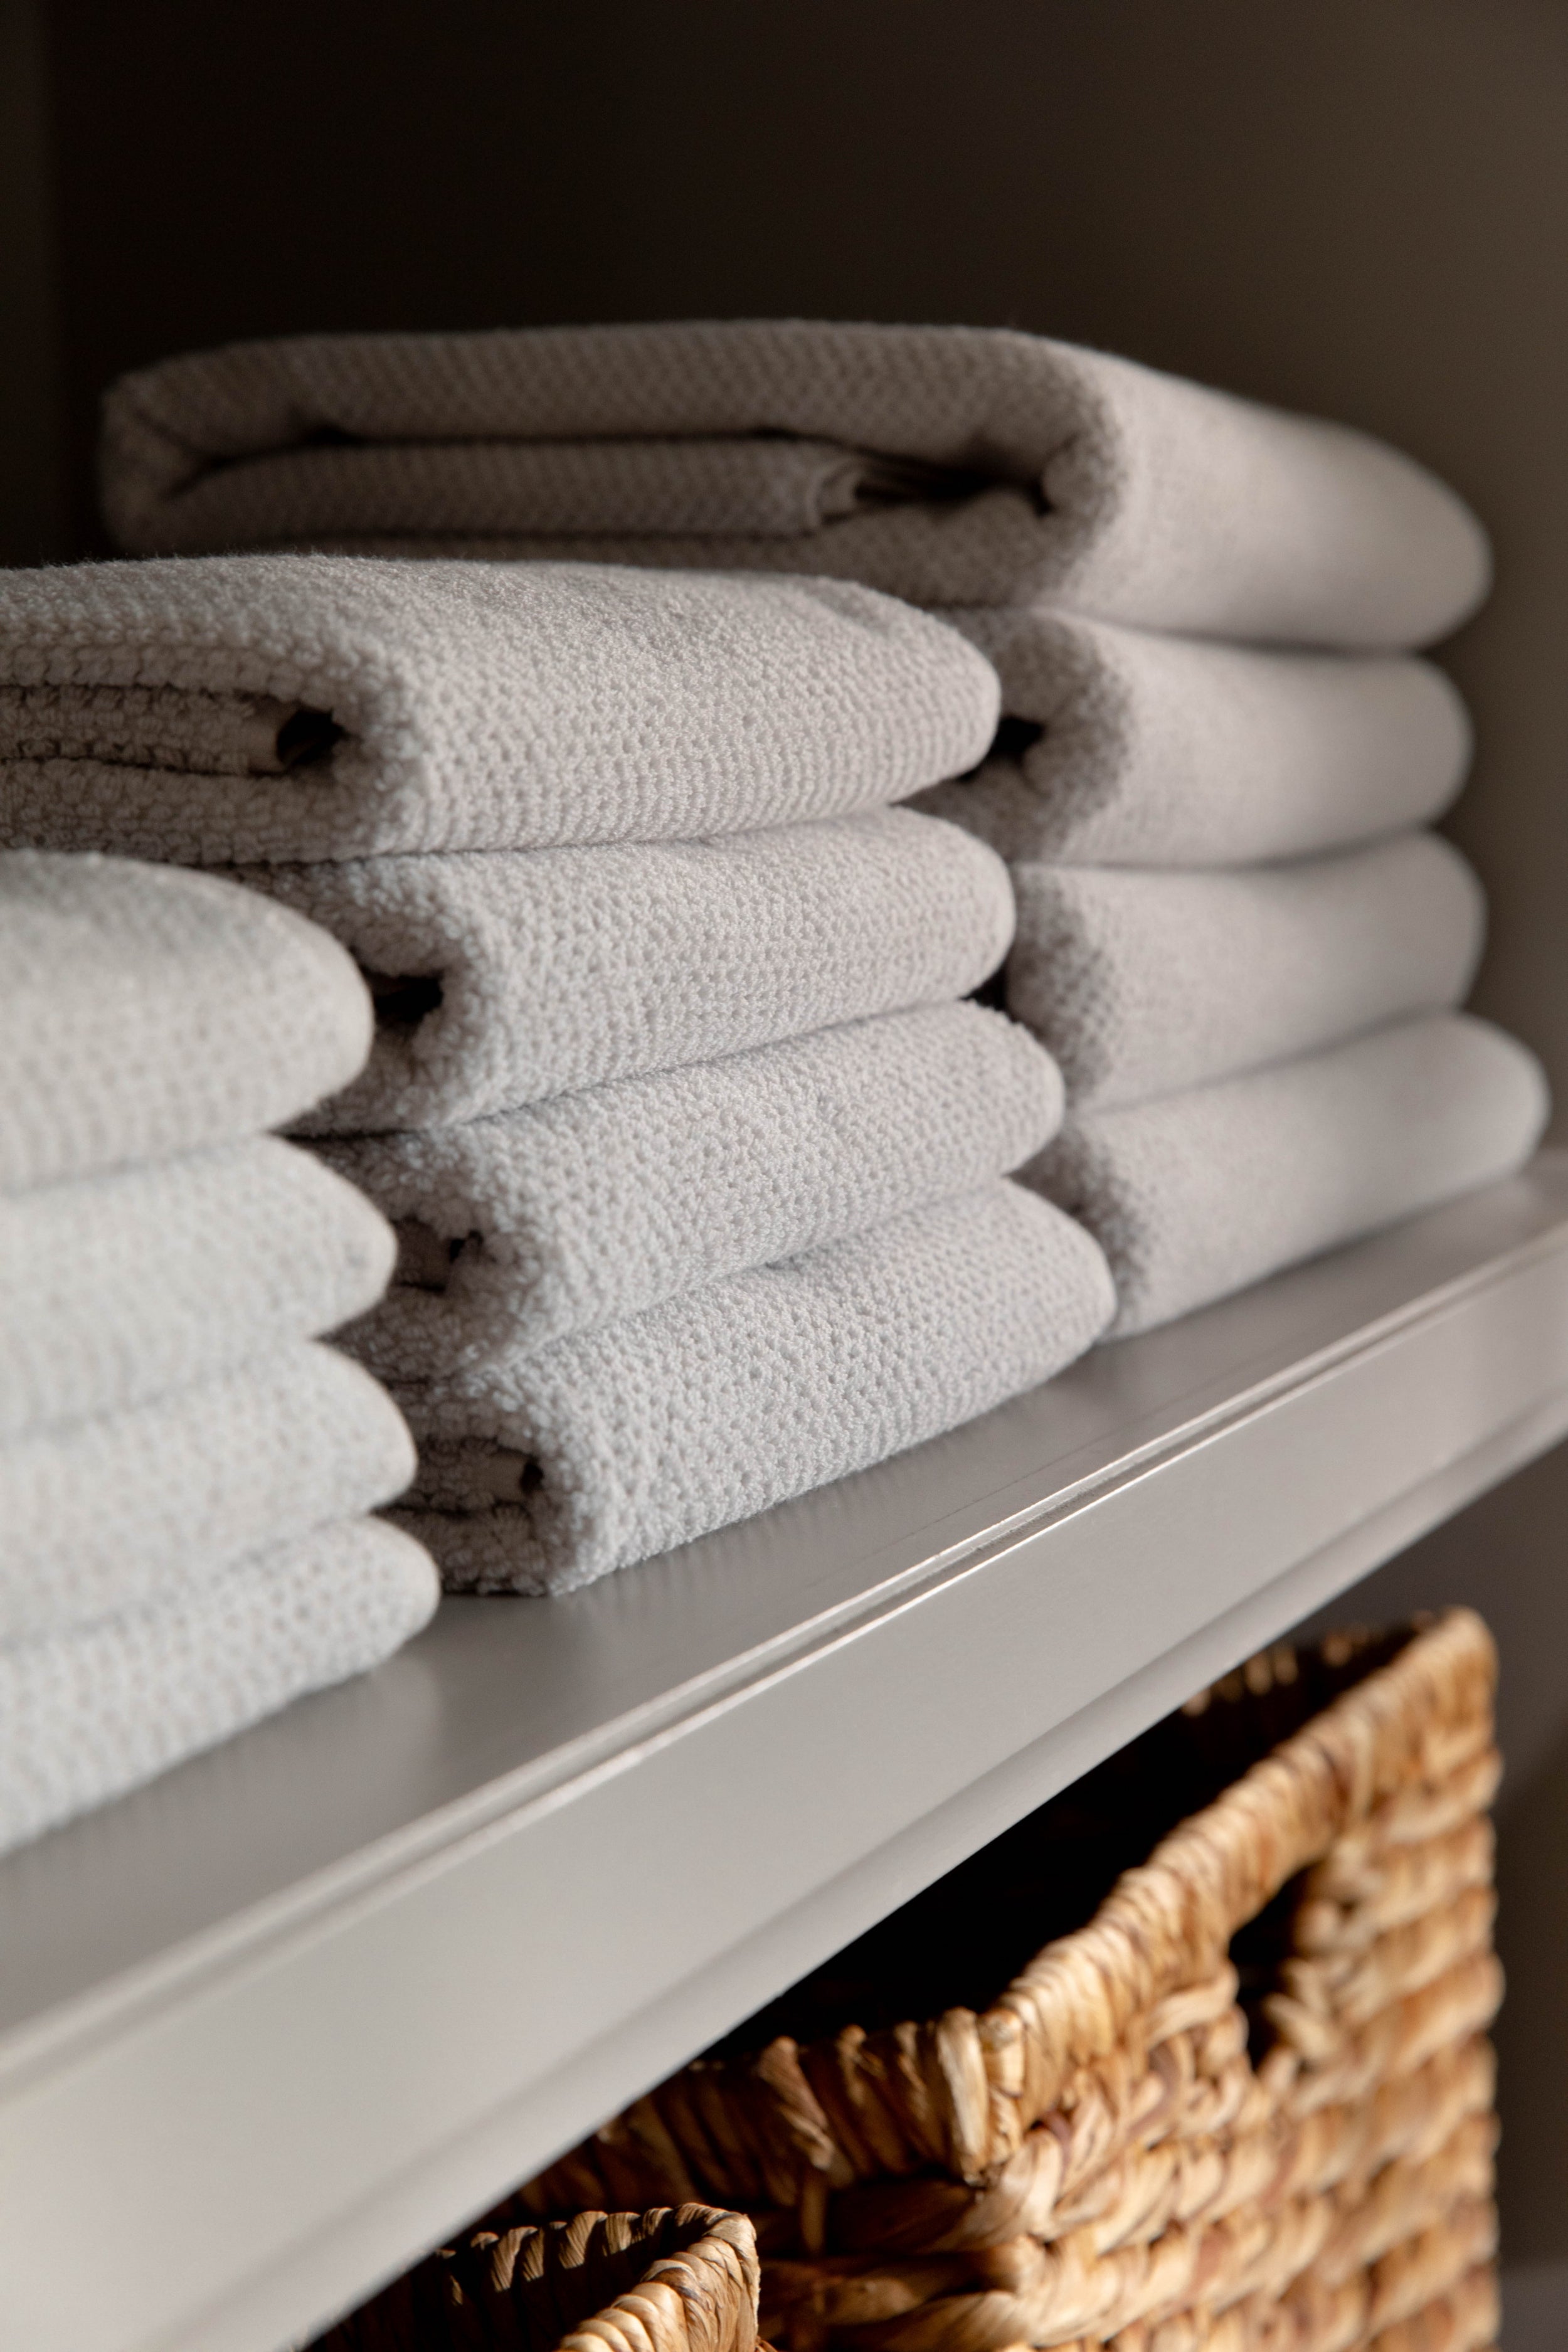 Complete Nantucket Bath Bundle in the color Heathered Light Grey. Photo of Complete Nantucket Bath Bundle taken as the towels rest on a shelf in a bathroom. |Color: Heathered Light Grey